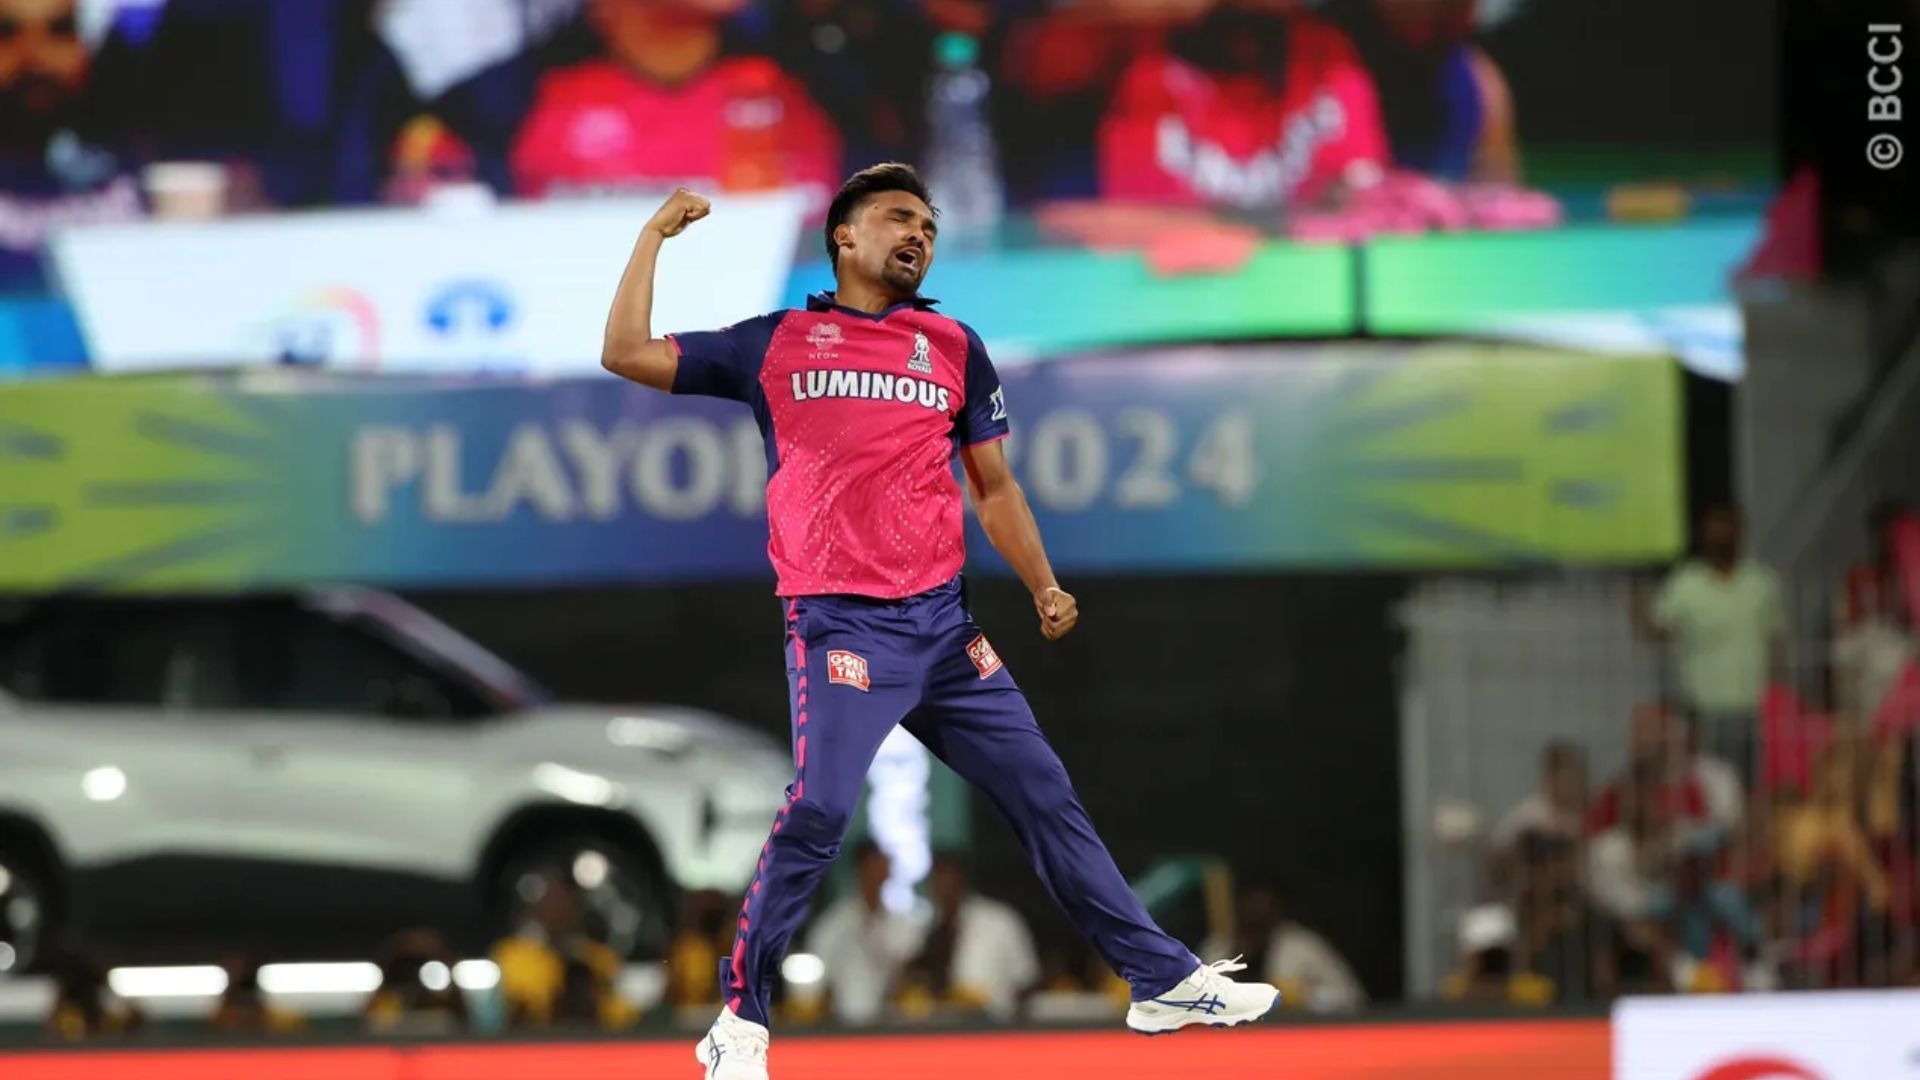 Sandeep Sharma picked a total of 23 wickets in his last two seasons for RR (P.C.:iplt20.com)